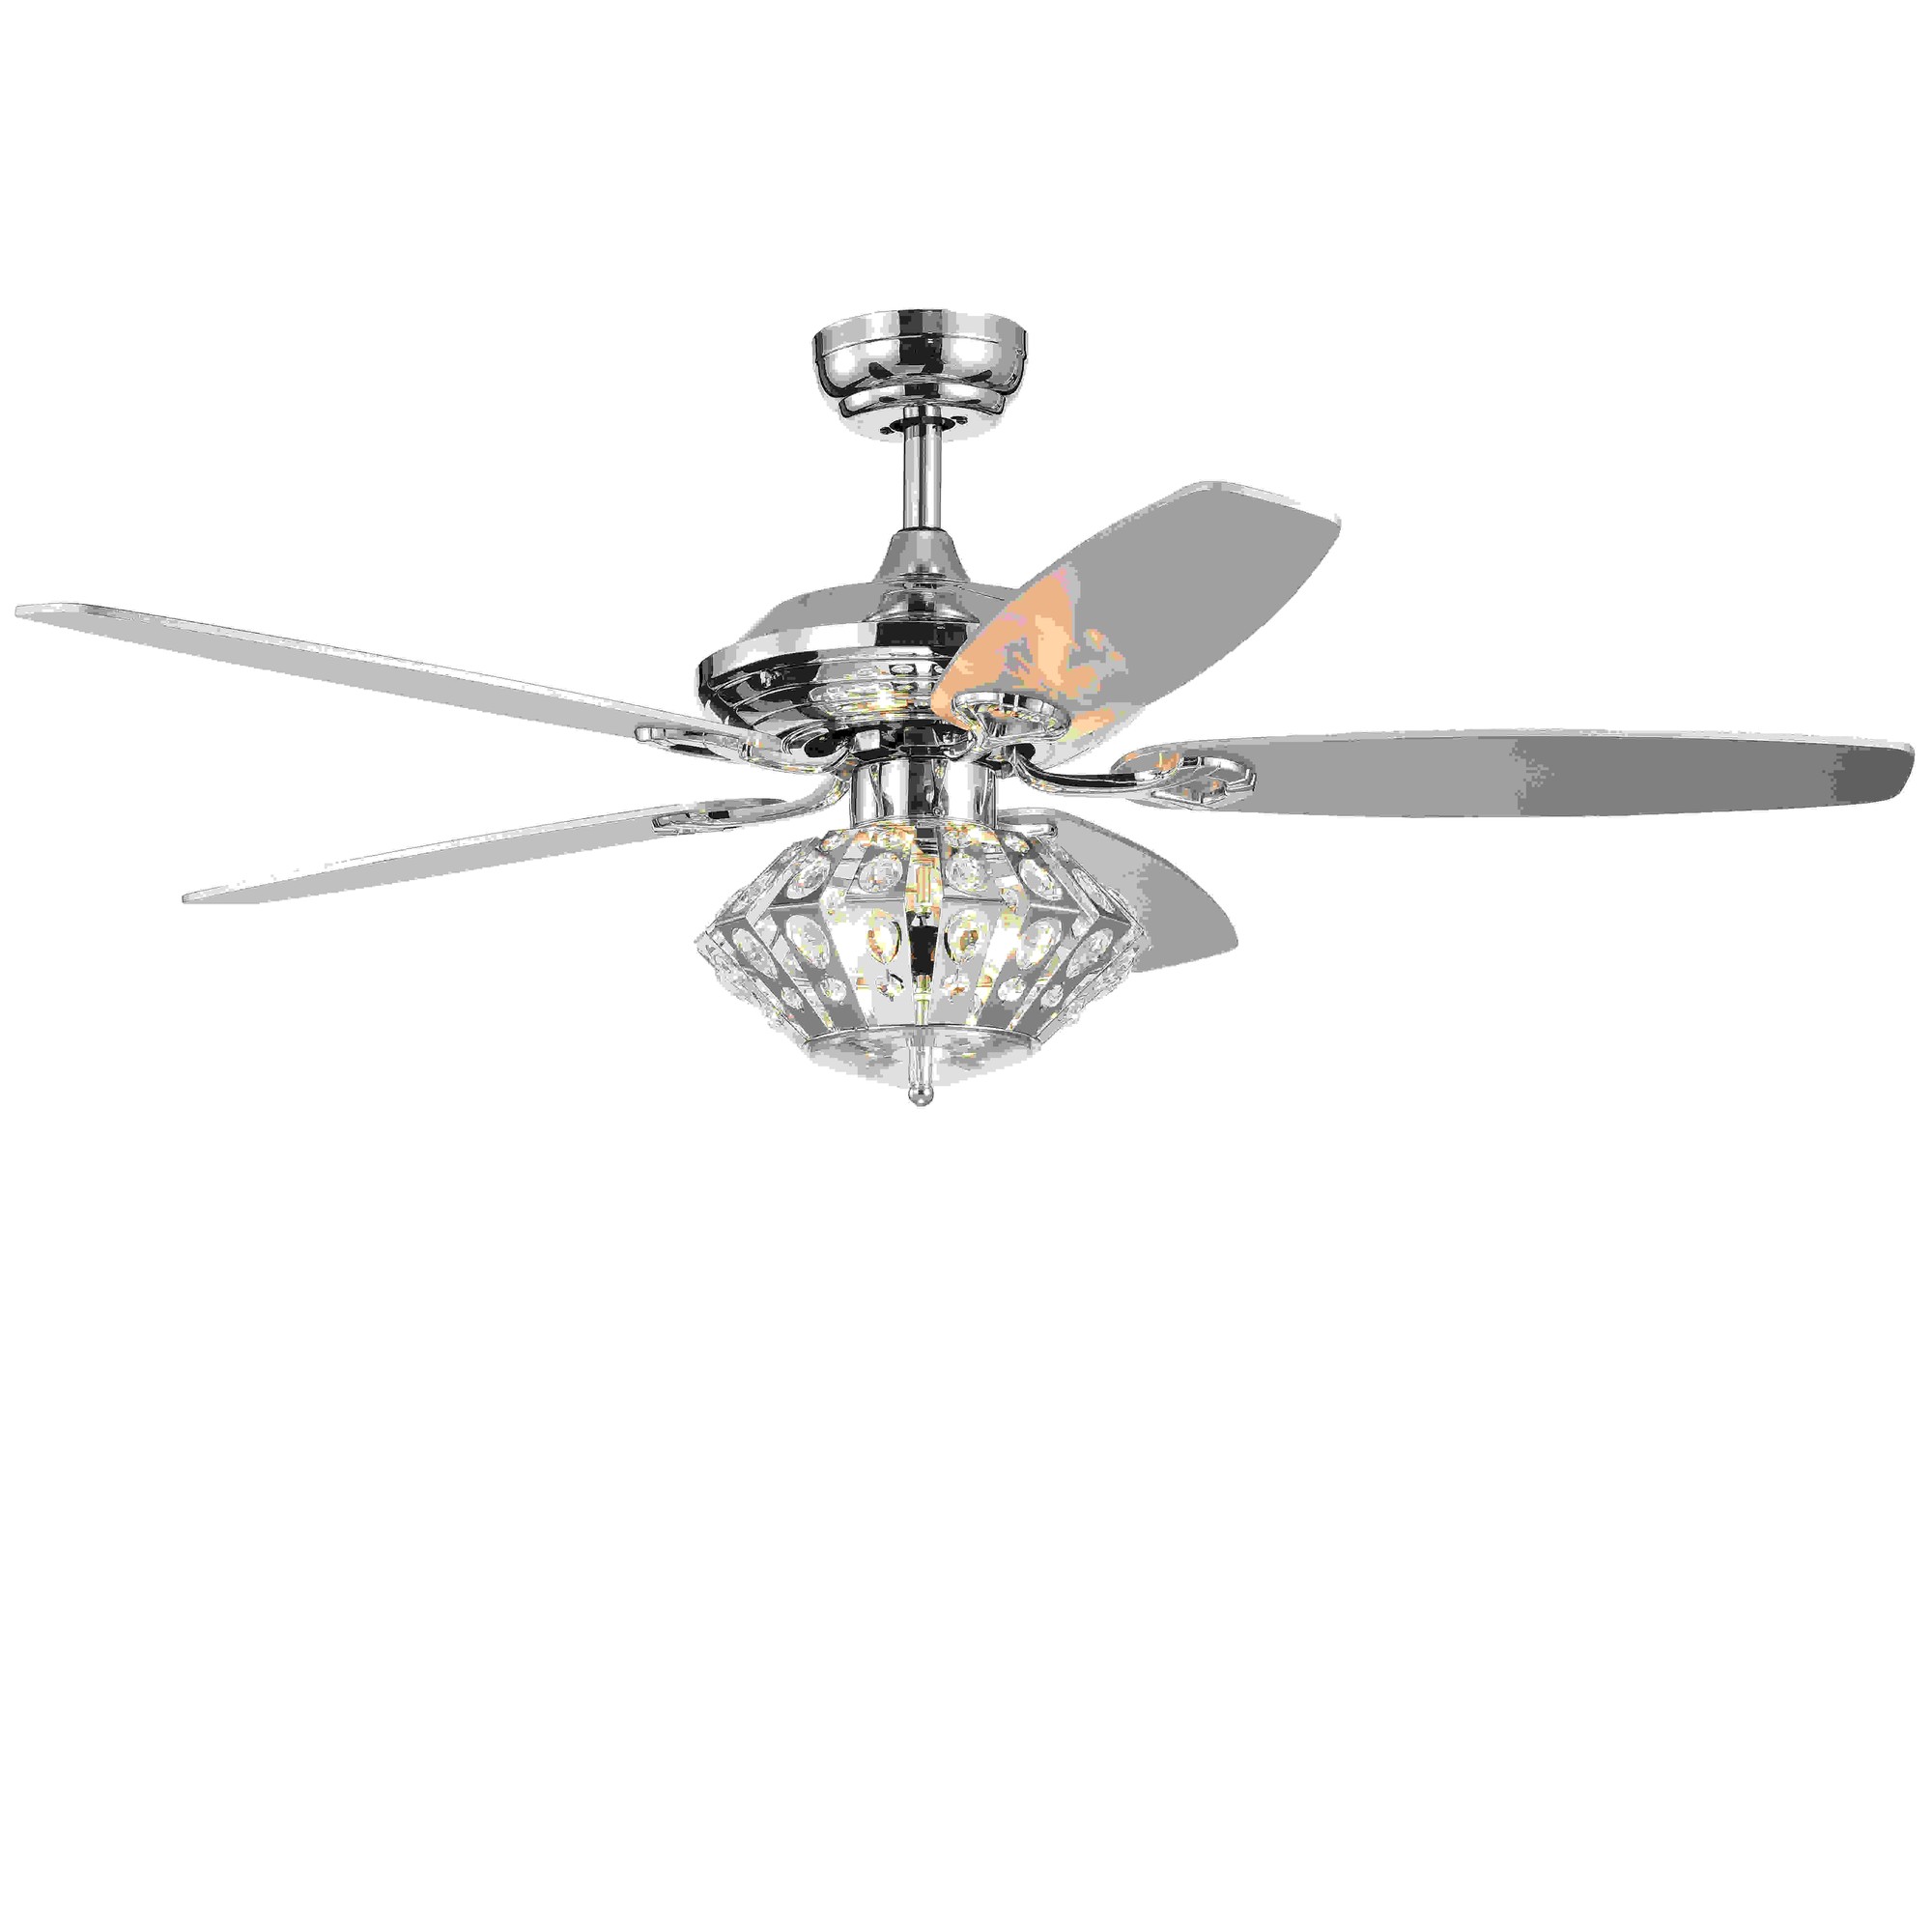 Extrelite Chrome 52-inch Lighted Ceiling Fan Vented Metal and Crystal Shade (incl. Remote & 2 Color Option Blades)